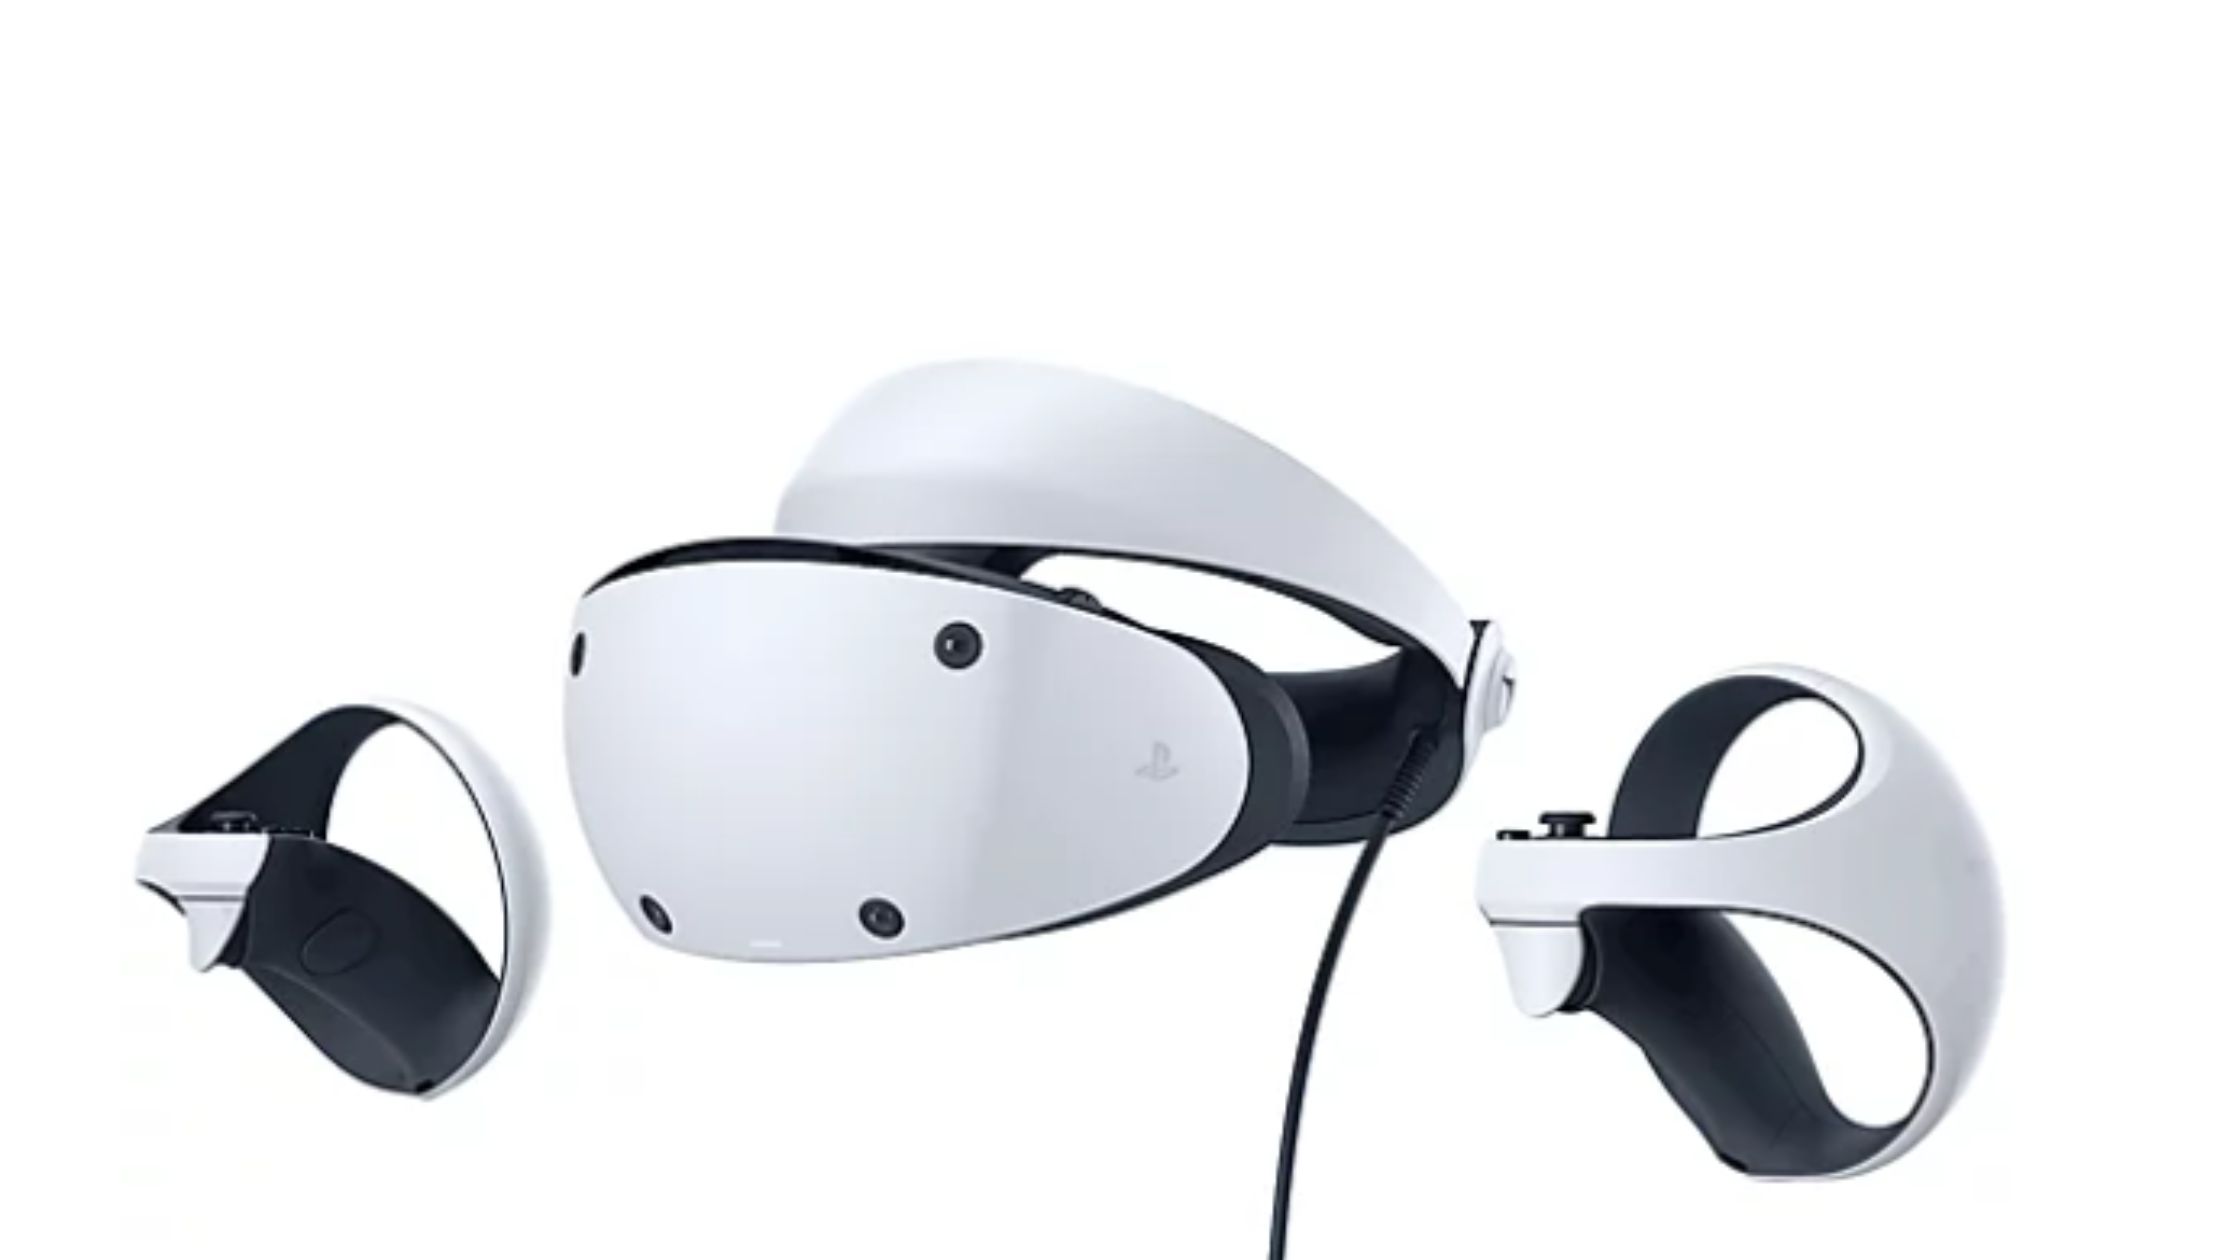 PSVR2 is available at $549.99 / €599.99 / £529.99 / ¥74,980